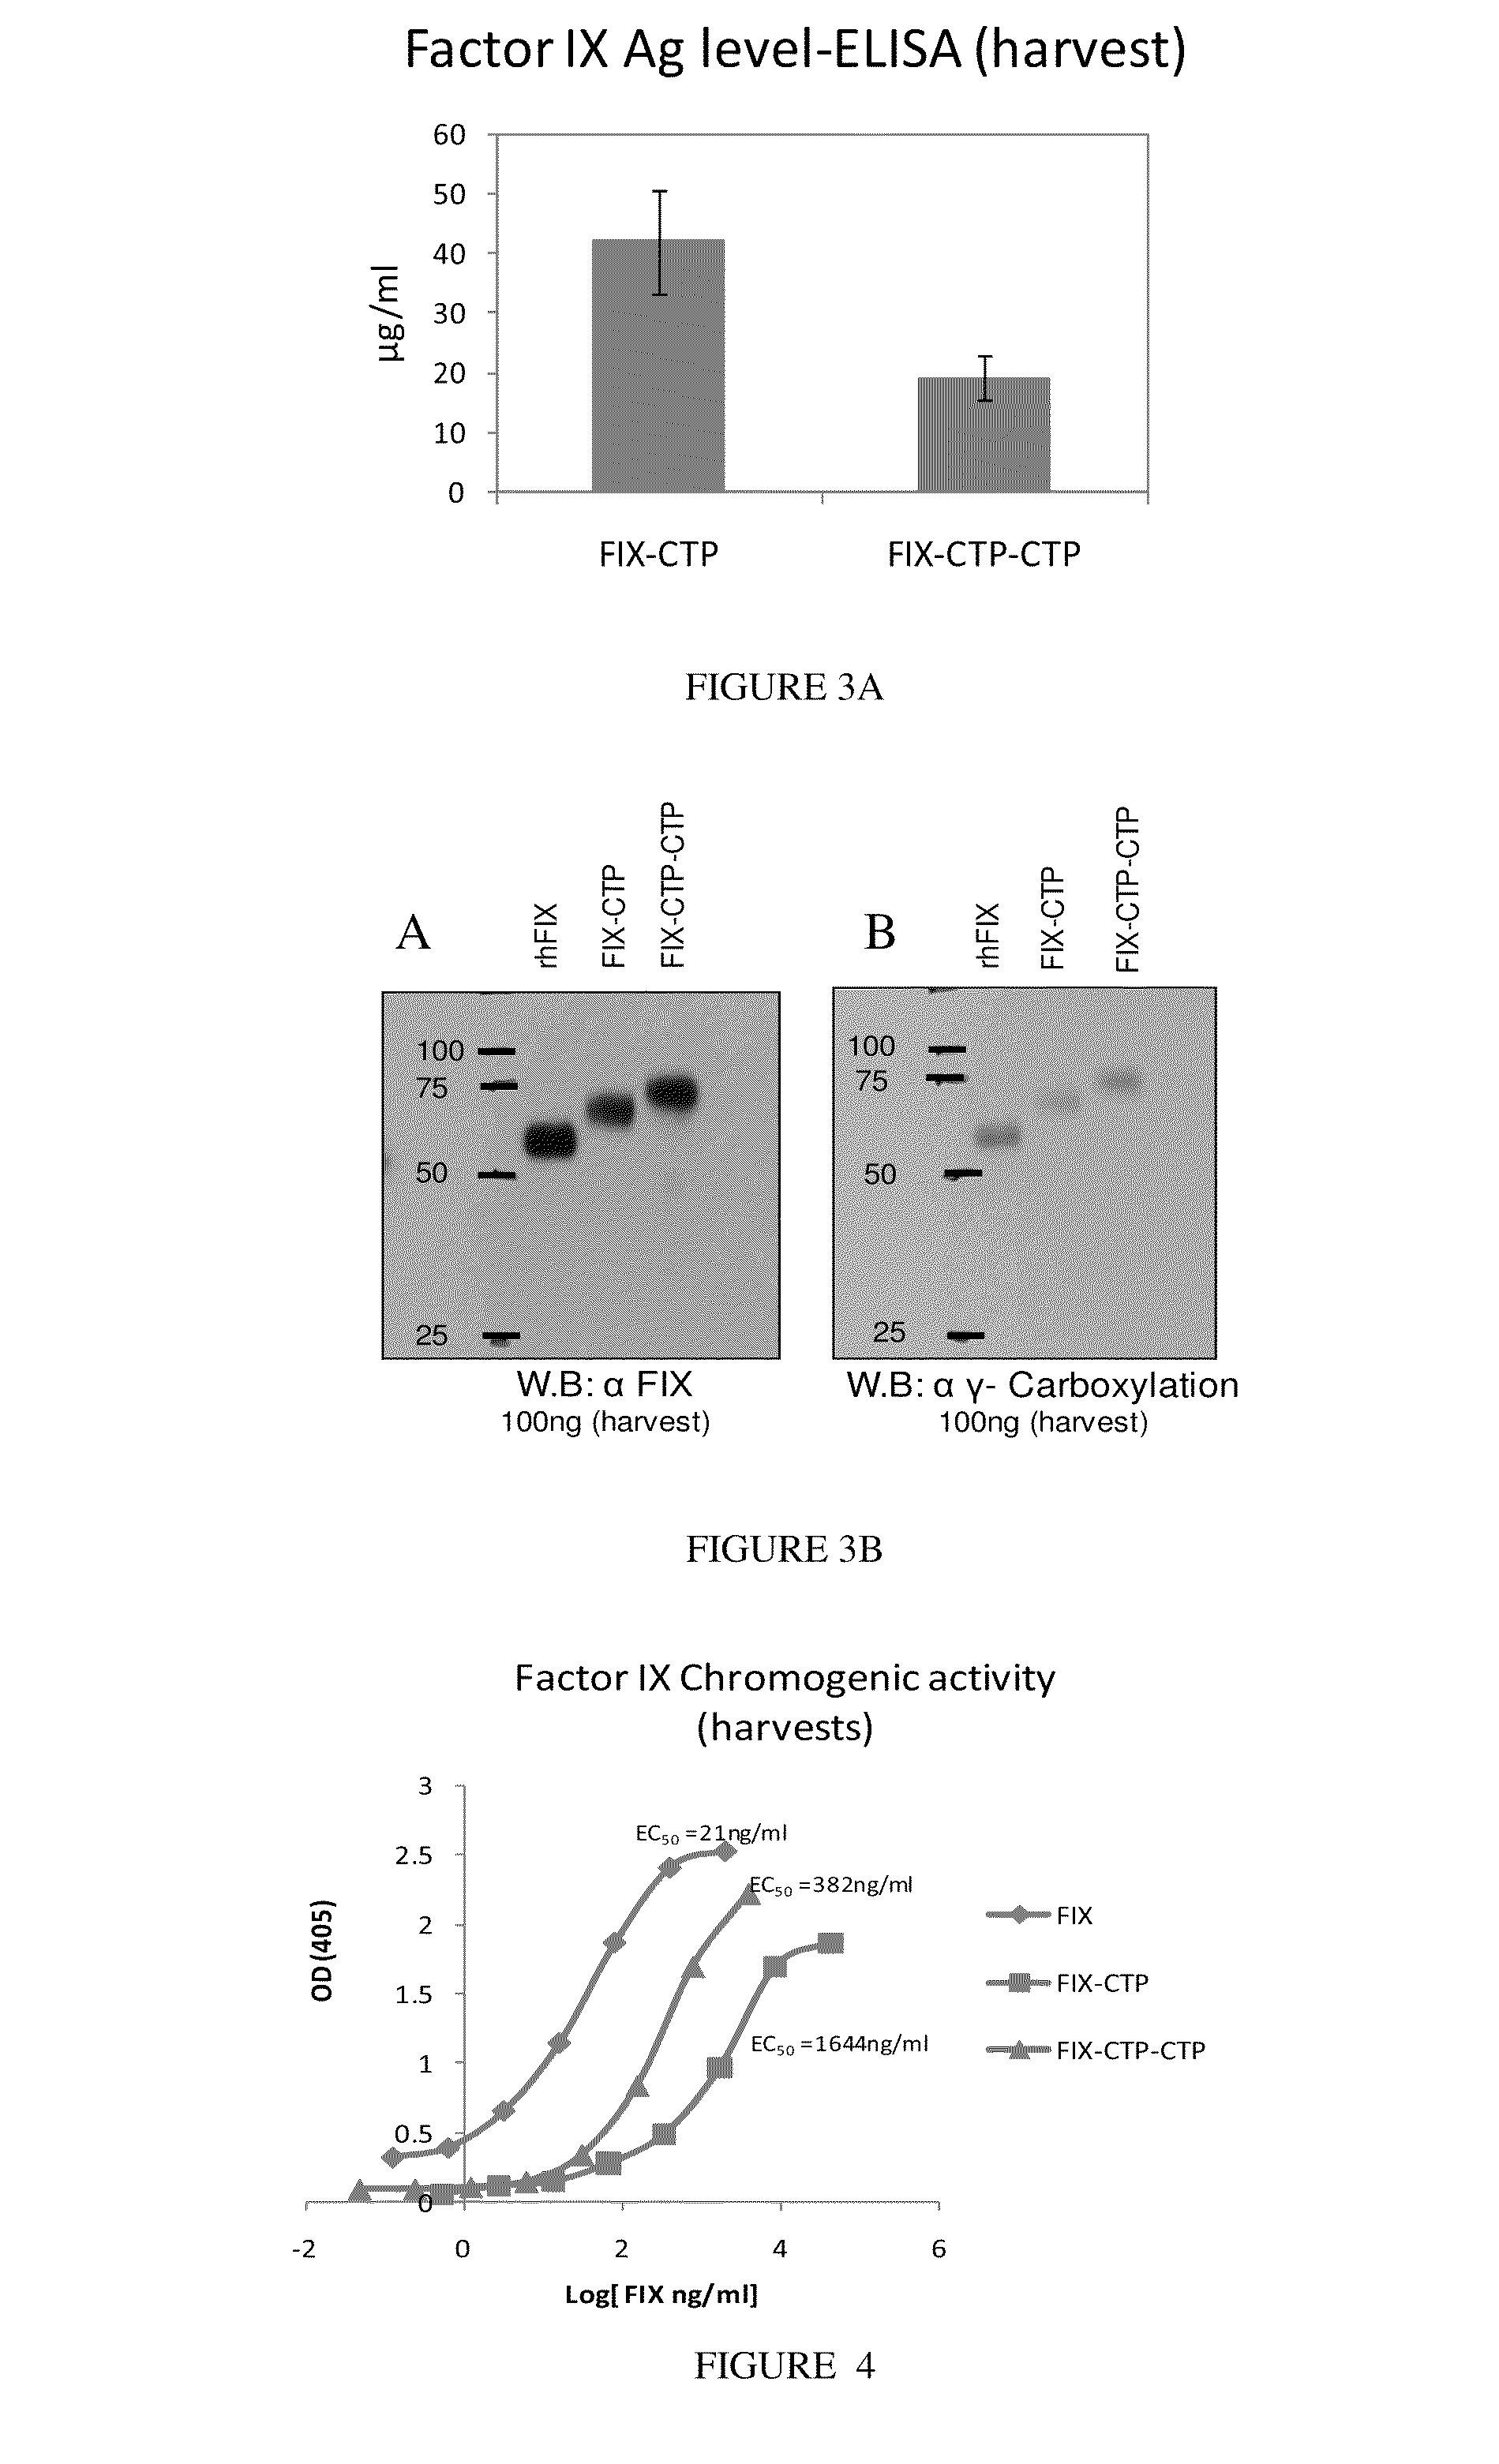 Long-acting coagulation factors and methods of producing same